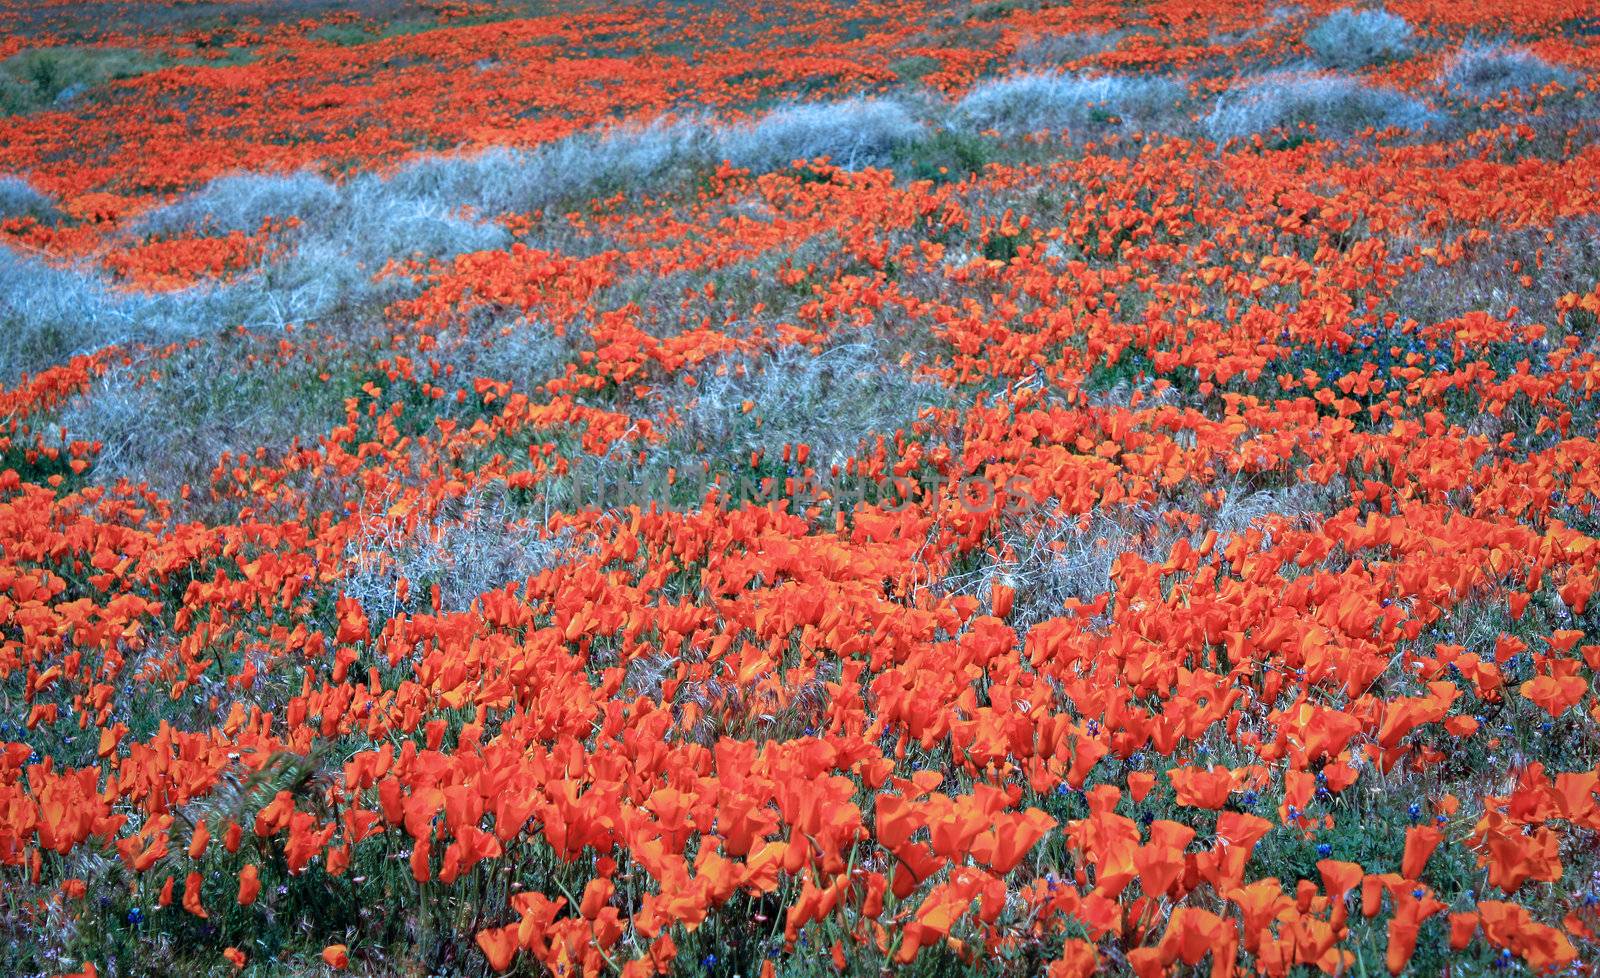 California Wildflowers and Poppies by wolterk